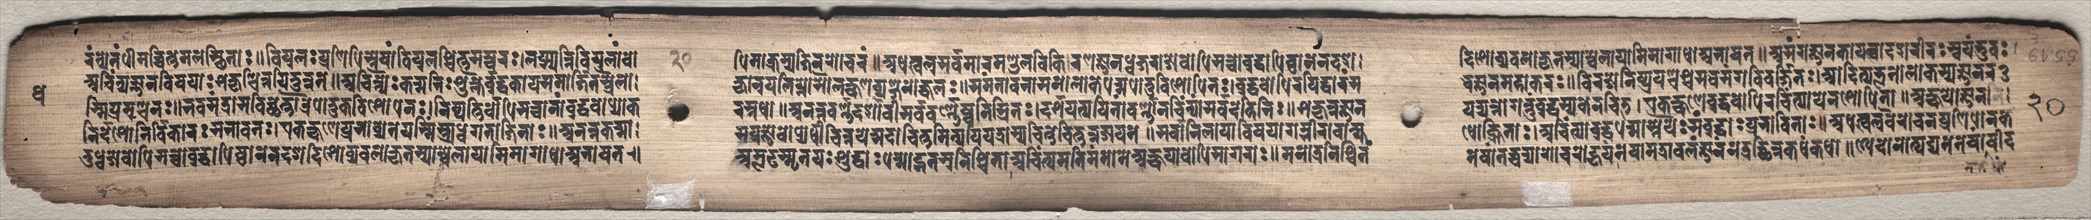 Leaf from Gandavyuha: text,  from Chapter 1, Verse 47 (verso), 1000-1100s. Eastern India, Pala